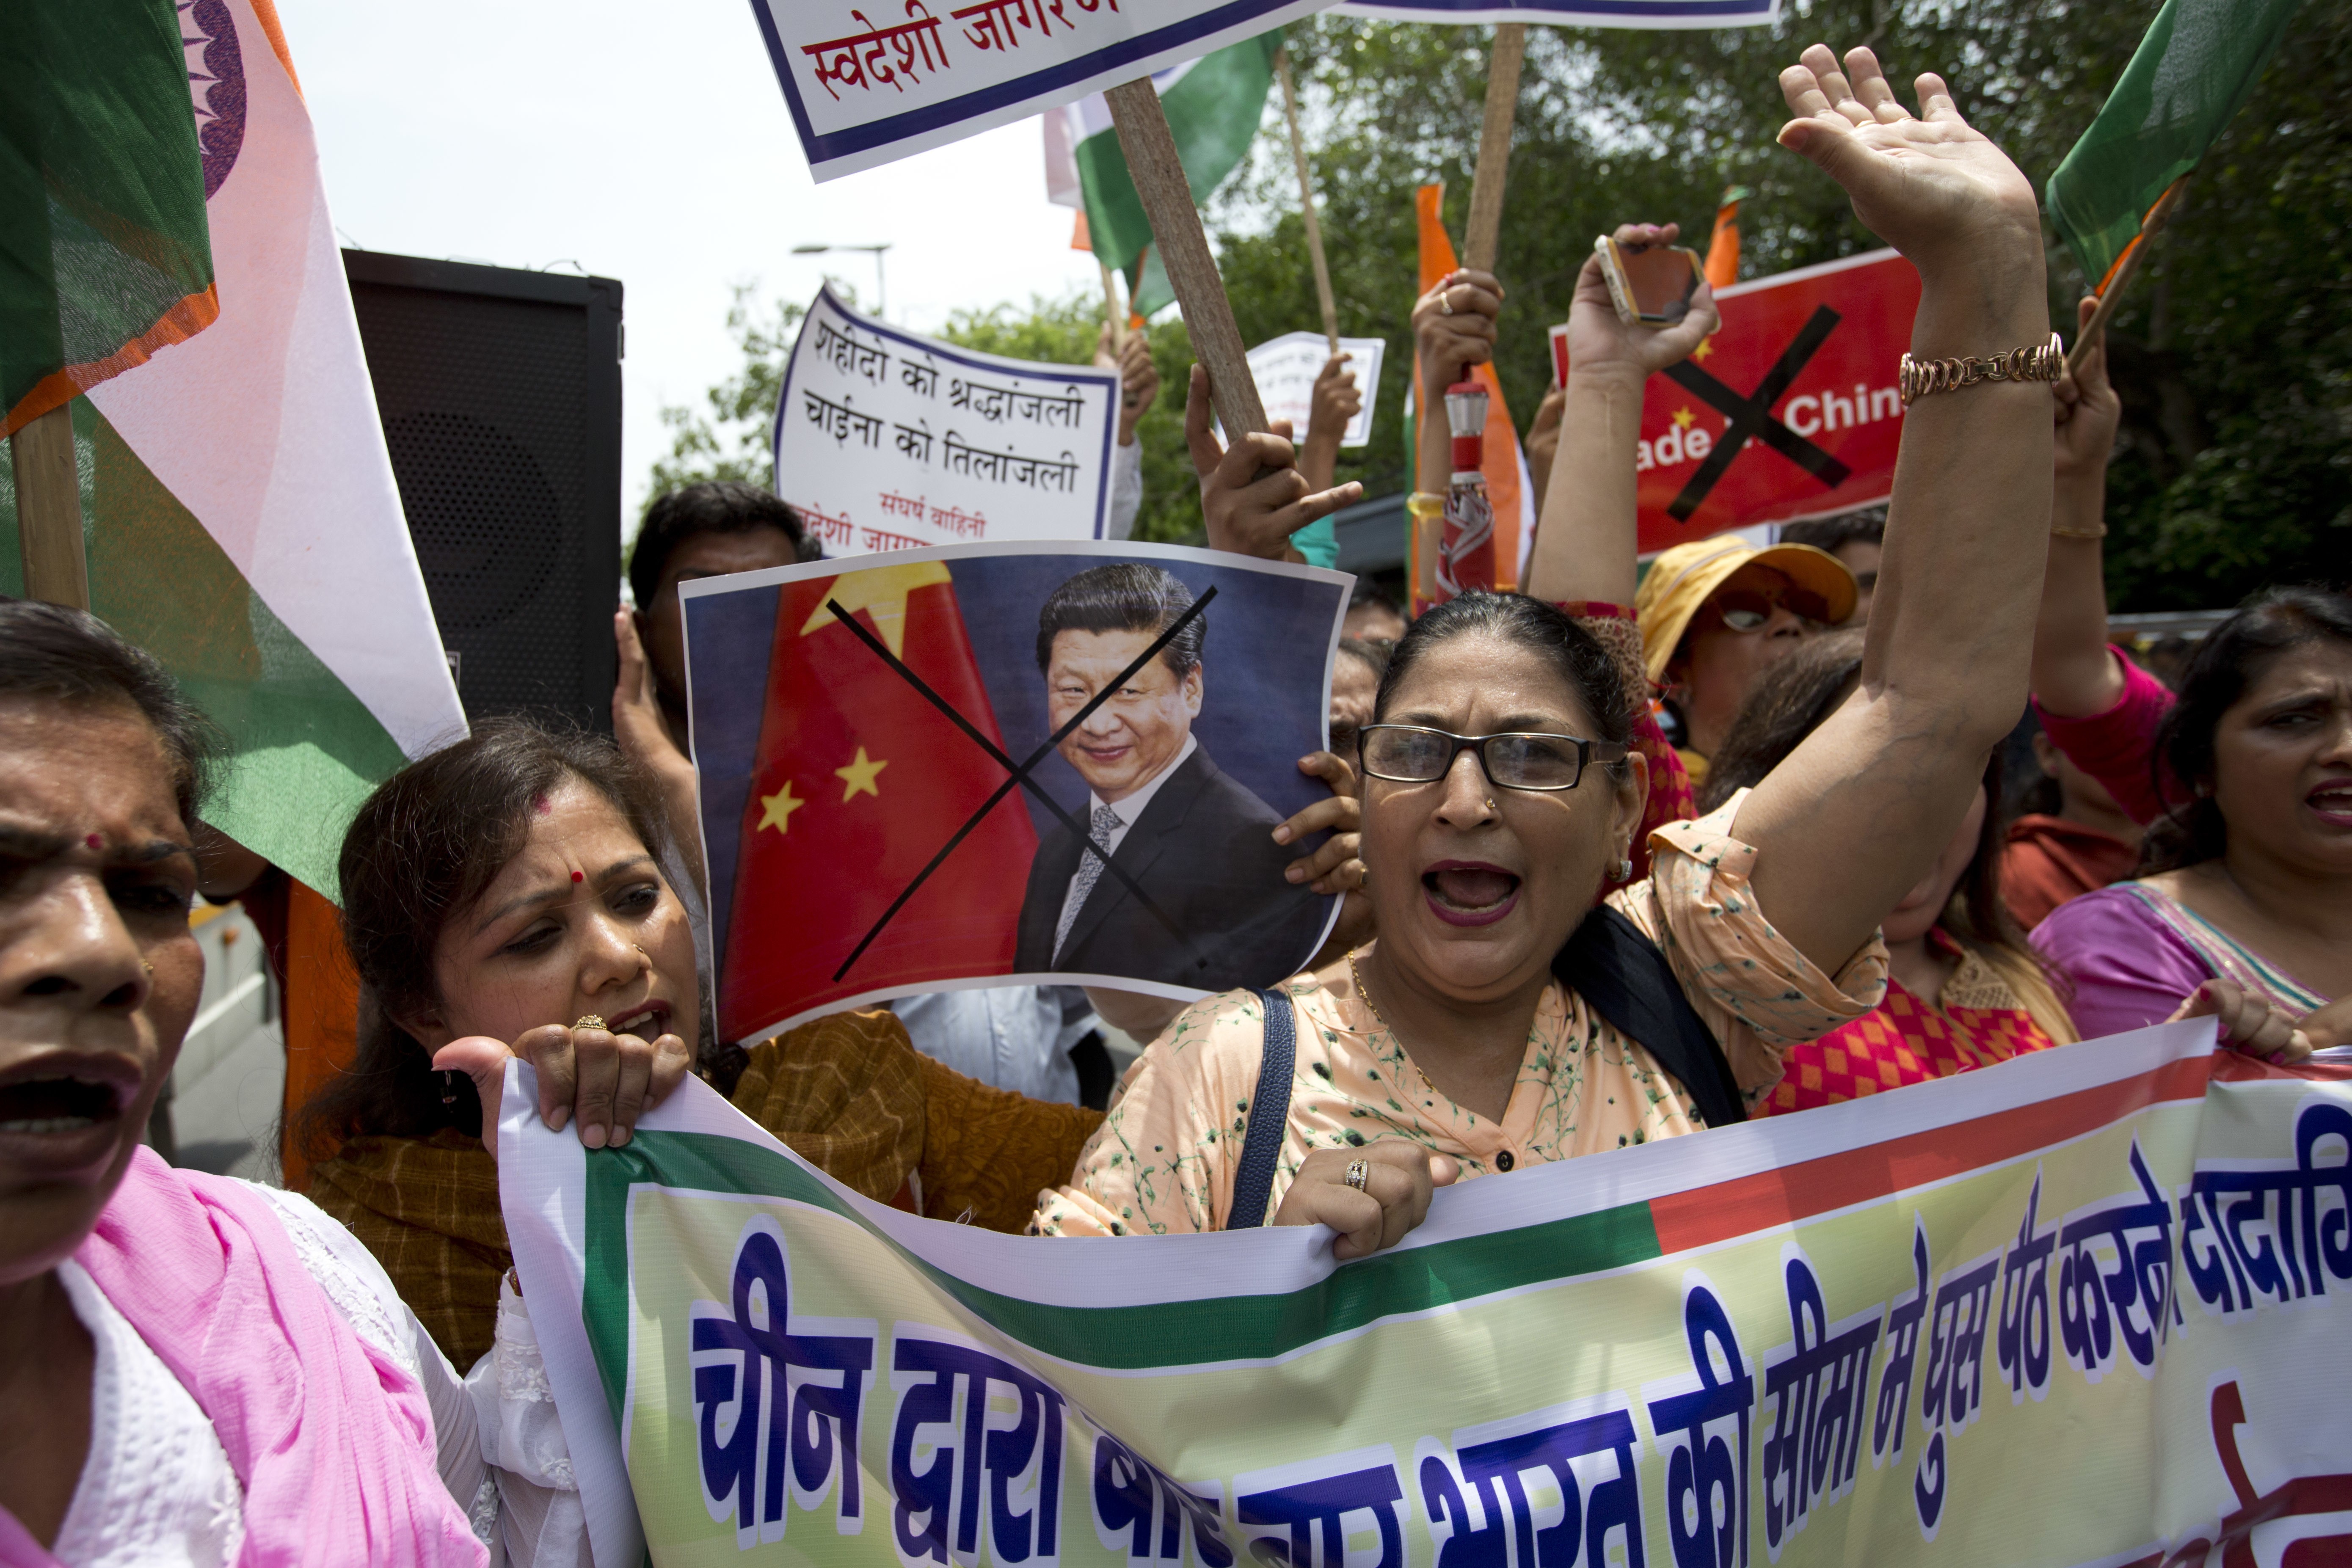 Half-baked calls to boycott Chinese goods in New Delhi and Beijing’s blockade on cheap Indian pharmaceuticals are a disservice to citizens in both countries